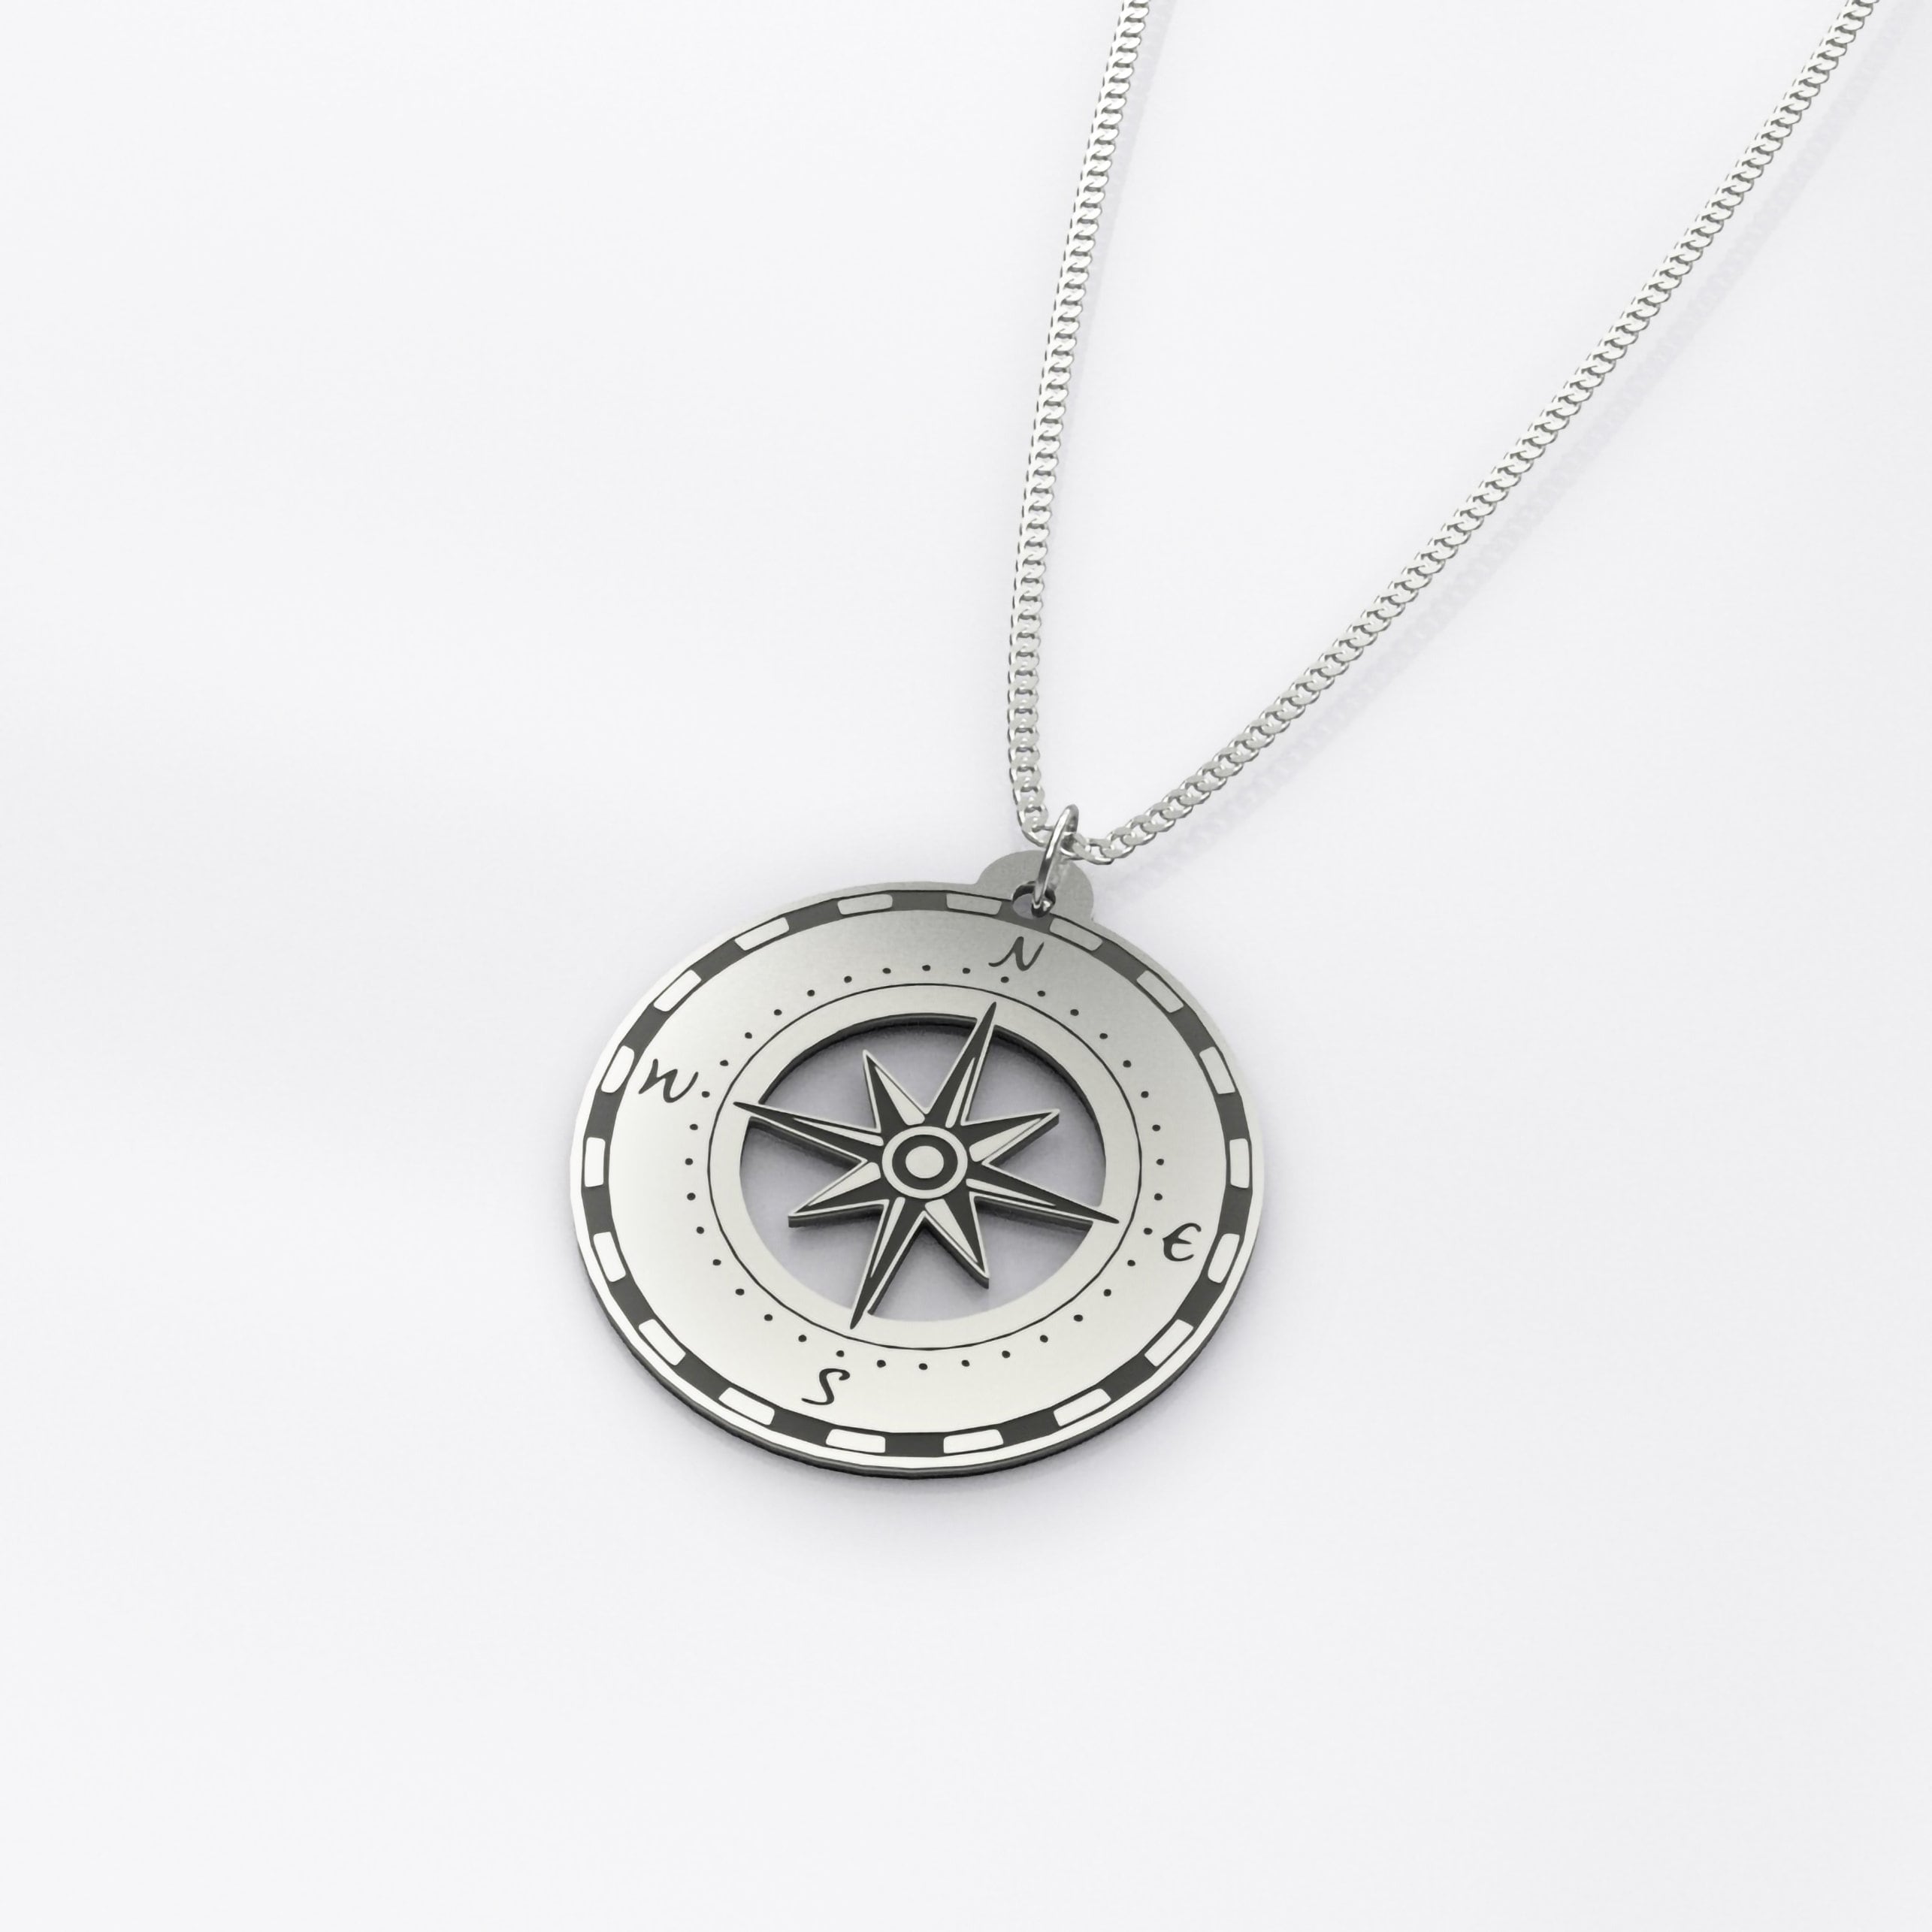 Compass Necklace Silver, Long Distance Relationship Gift, Graduation Gift,  Moving Away Gift, Friendship necklace, Sterling Silver or plated